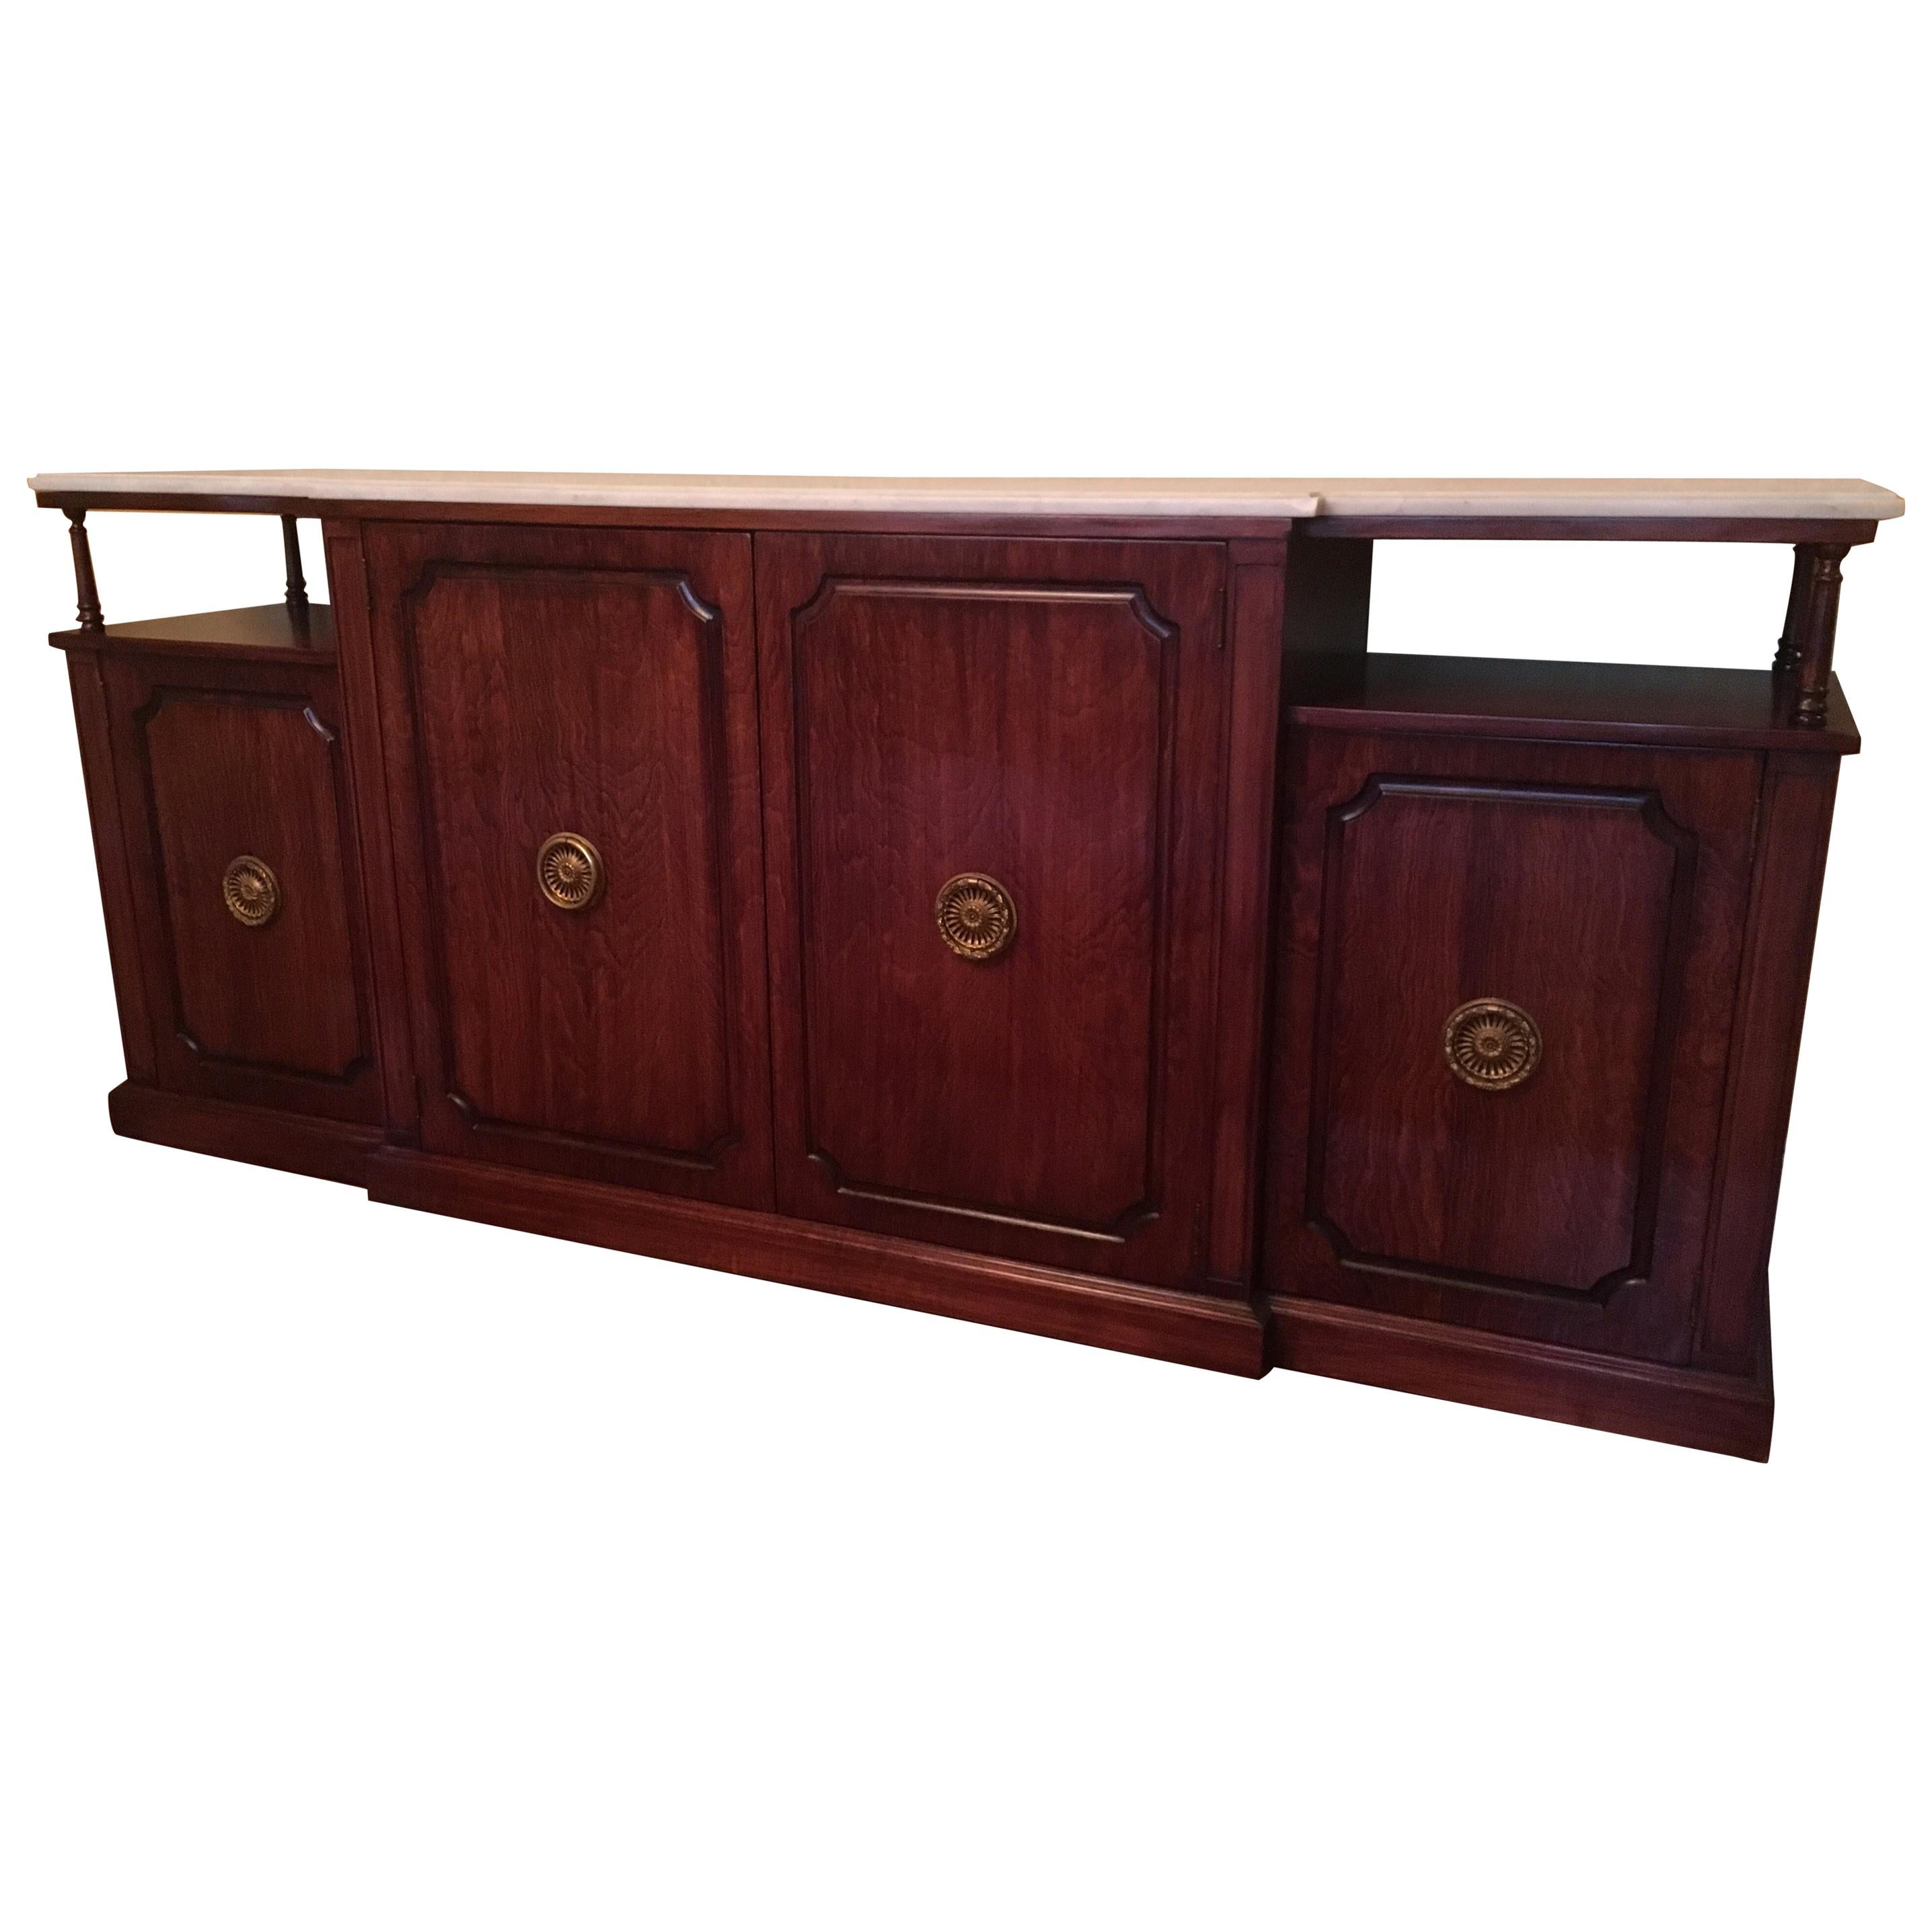 Rosewood Empire Style Credenza Sideboard with Marble Top, circa 1950s